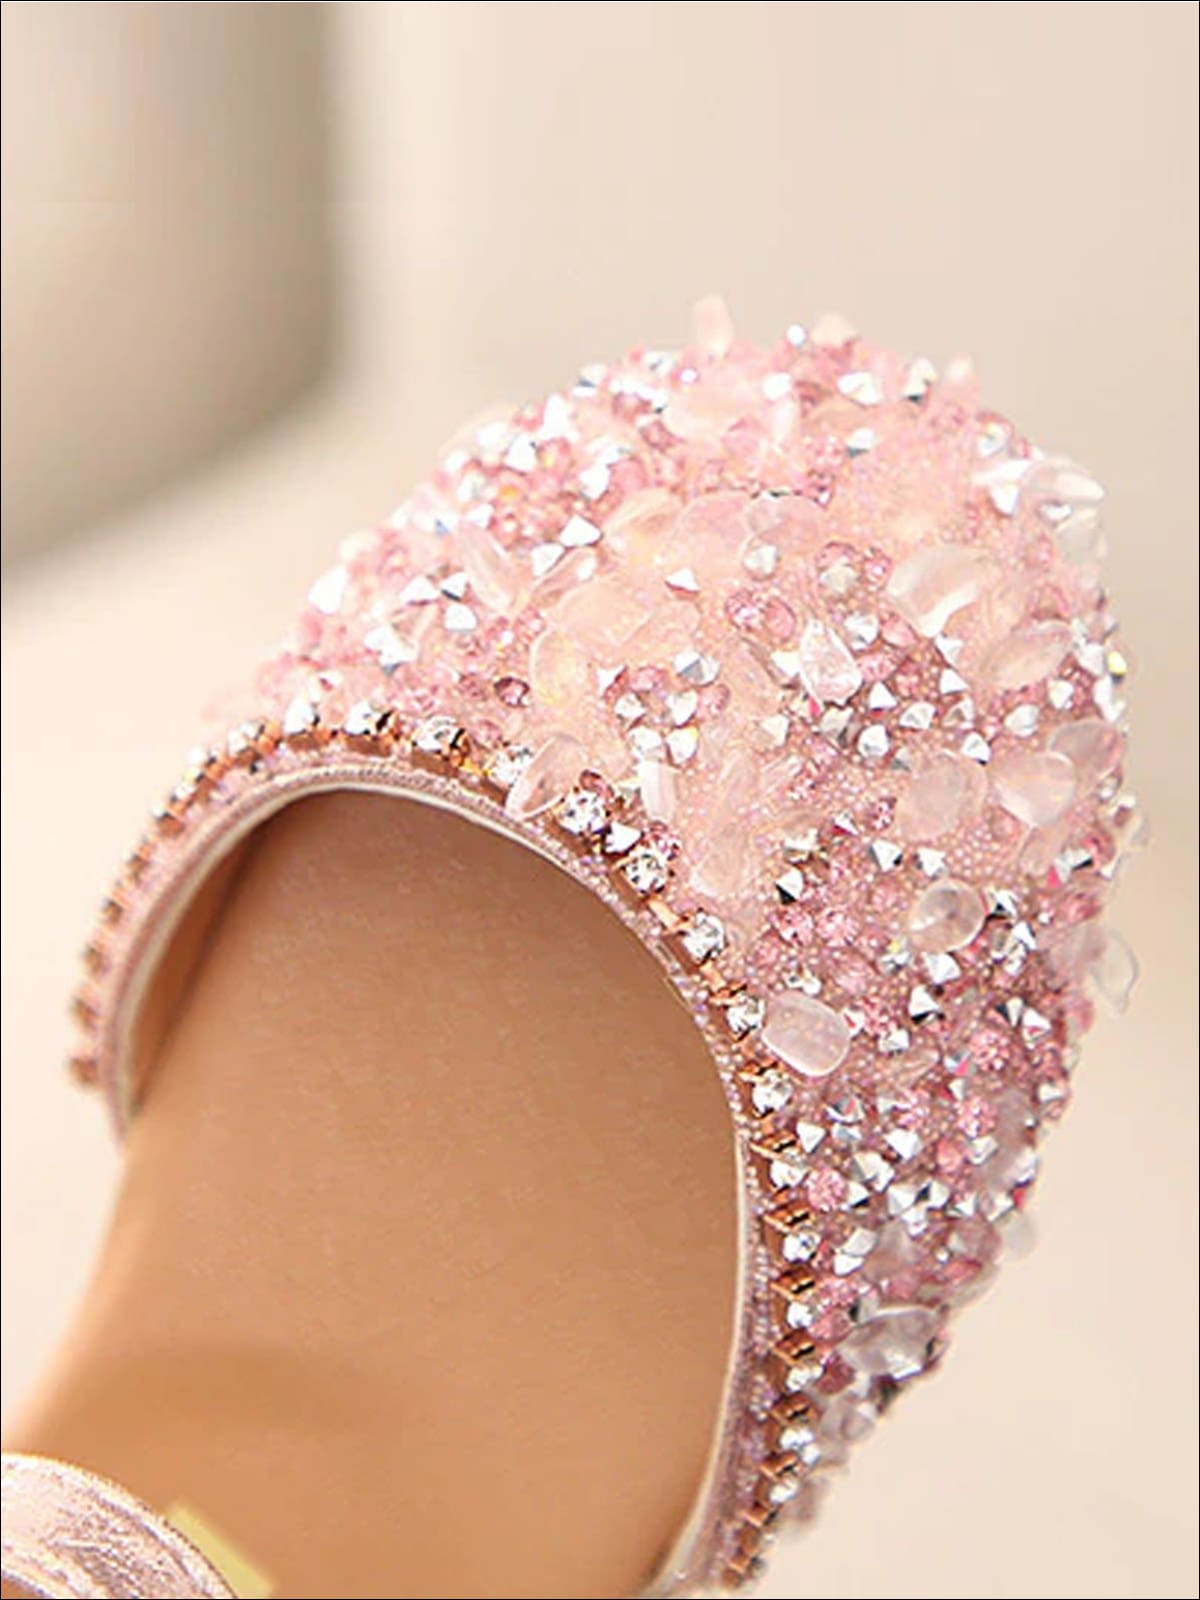 Mia Belle Girls Princess Sequined Bow Flats | Shoes By Liv and Mia